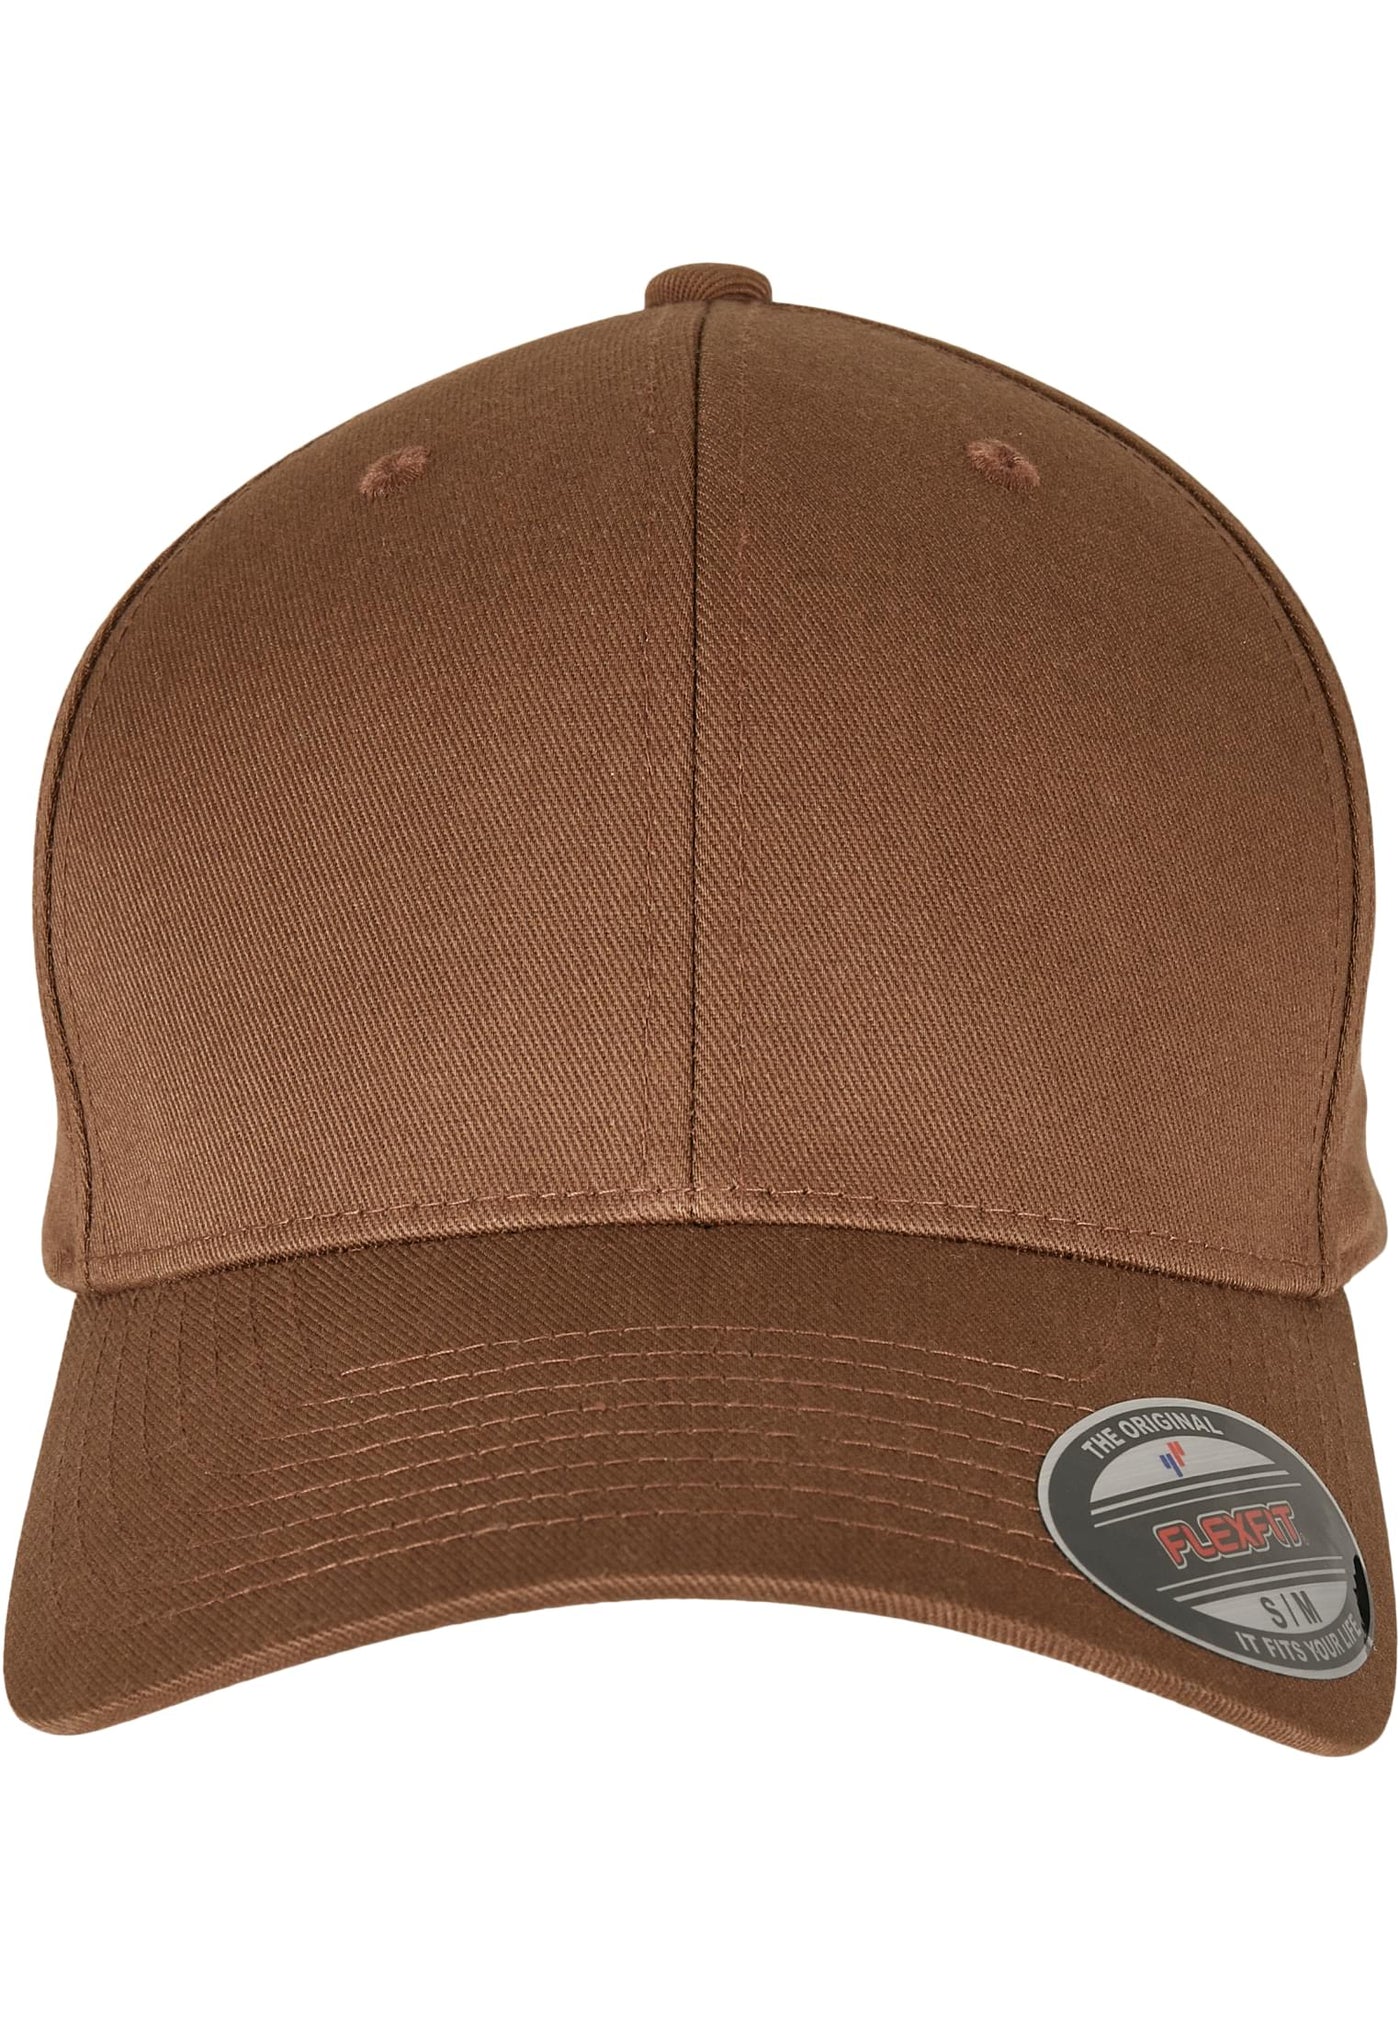 Flexfit Wooly Combed 6277 Cap - Coyote / Brown